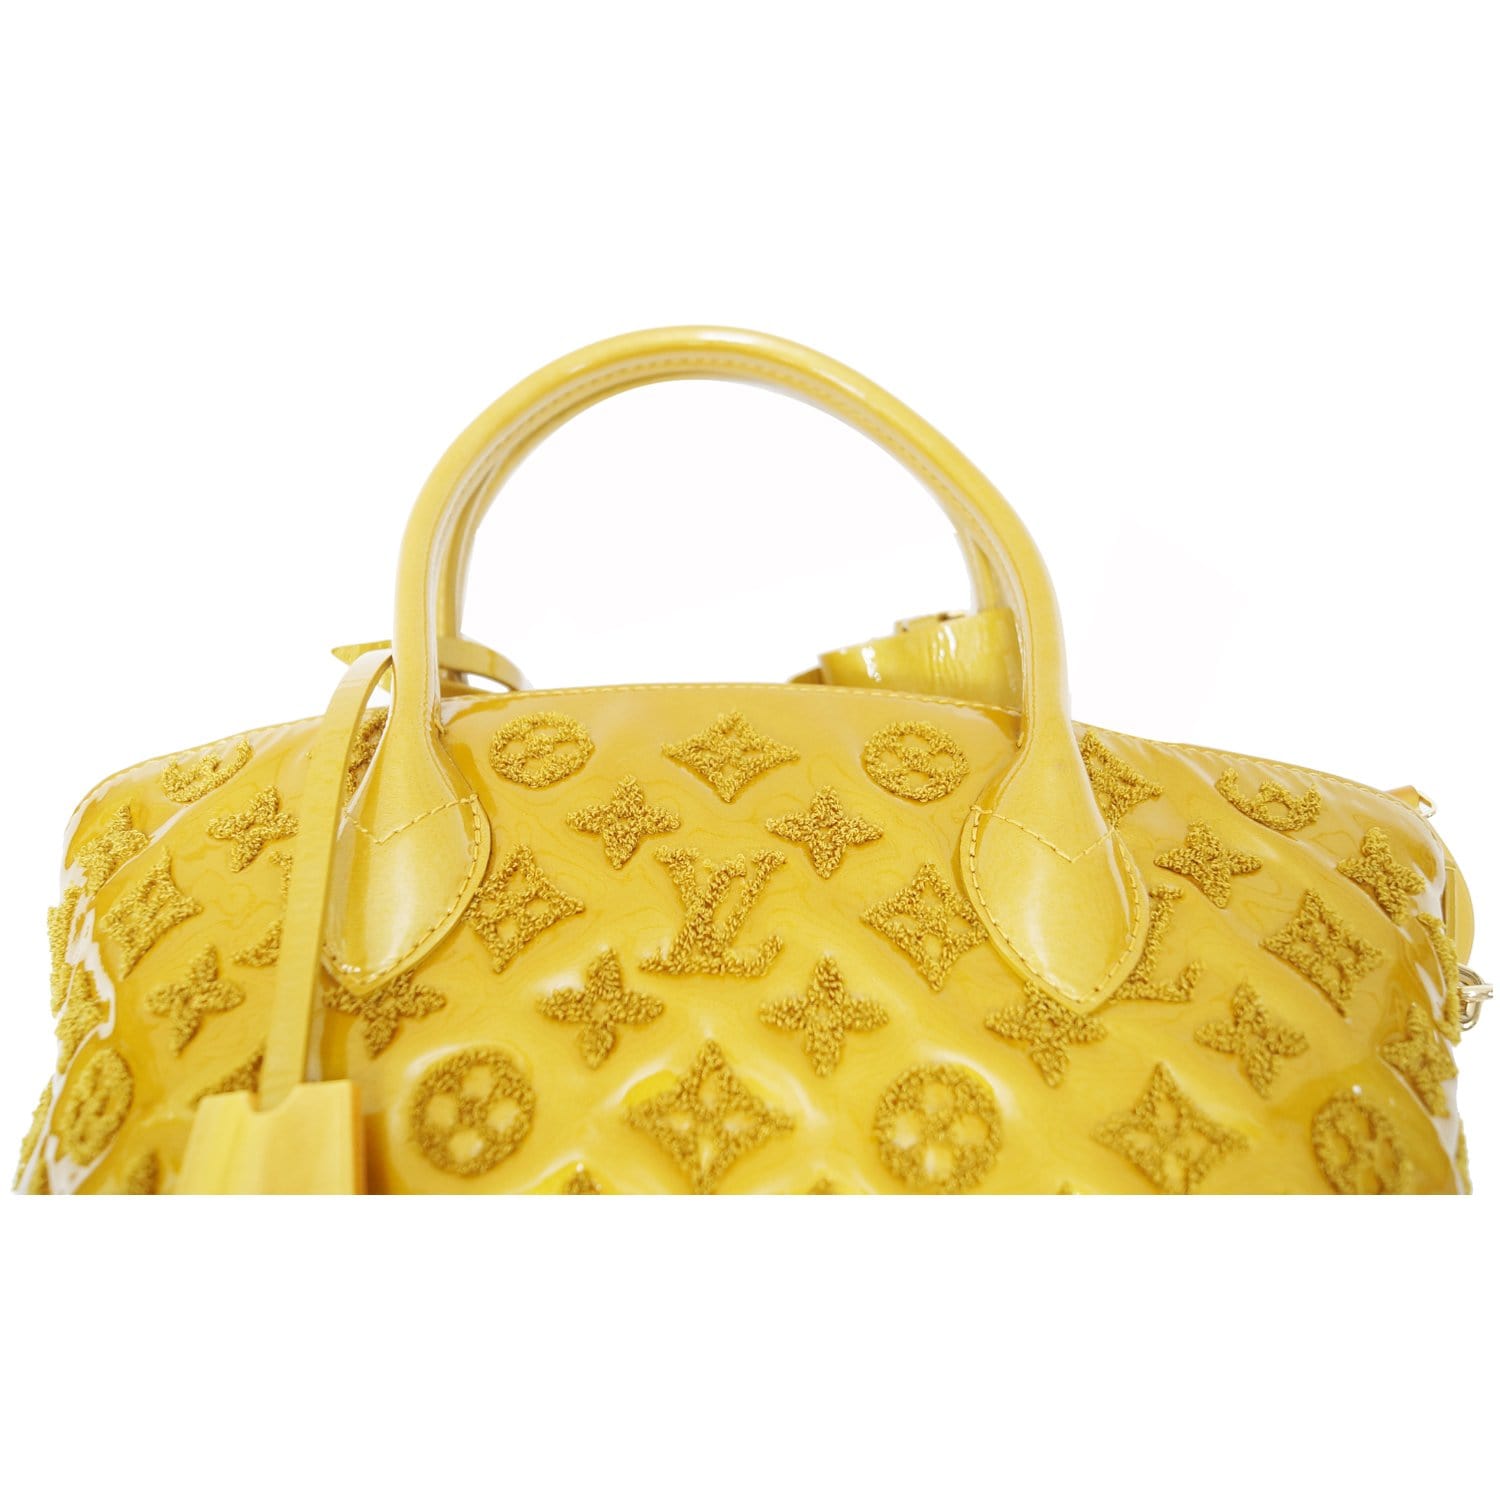 Only 758.00 usd for LOUIS VUITTON S Lock Sling Bag Monogram with  Fluorescent Yellow Online at the Shop